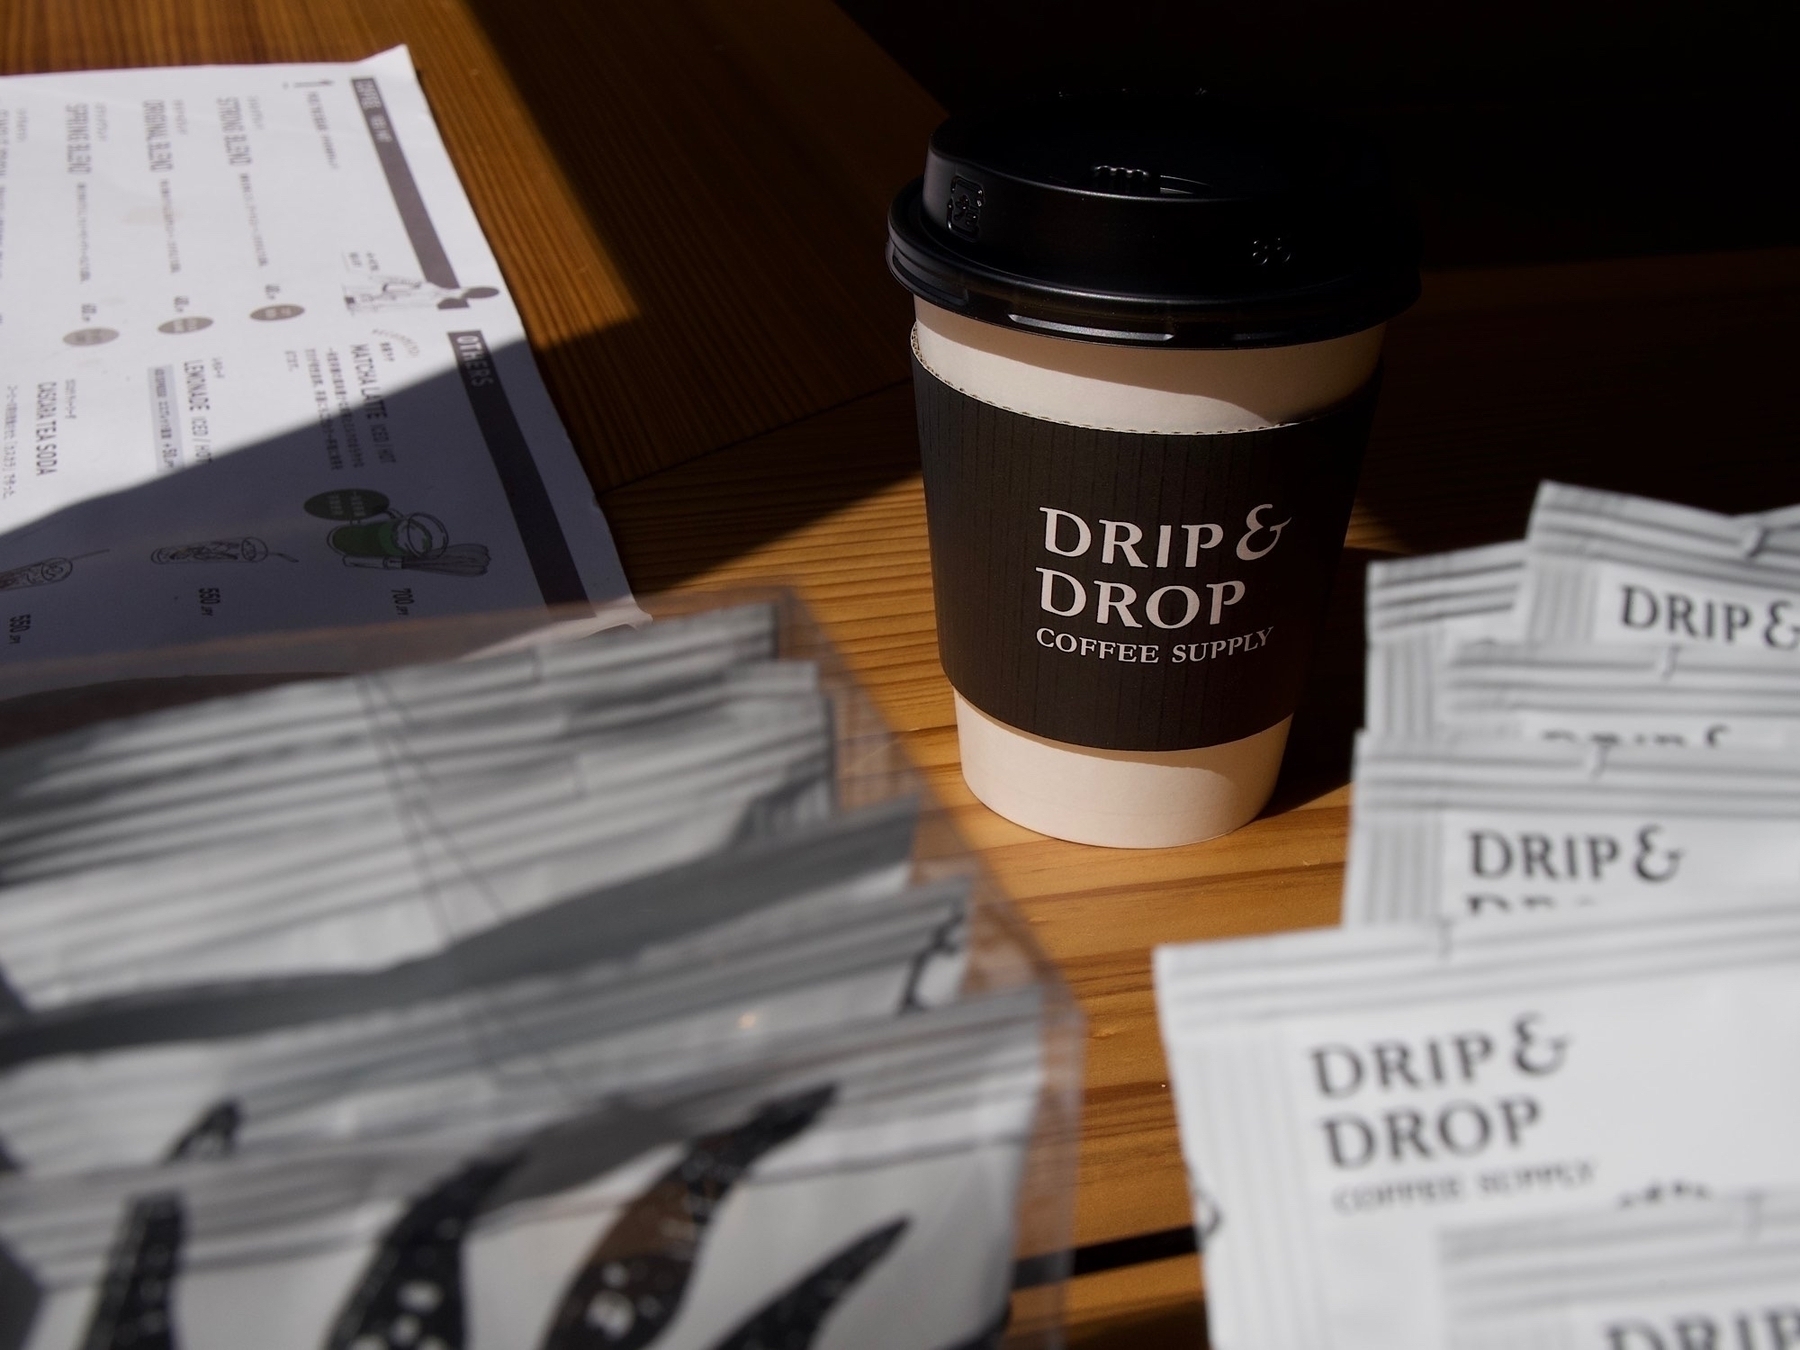 A Drip & Drop branded paper coffee cup sitting in the sunlight